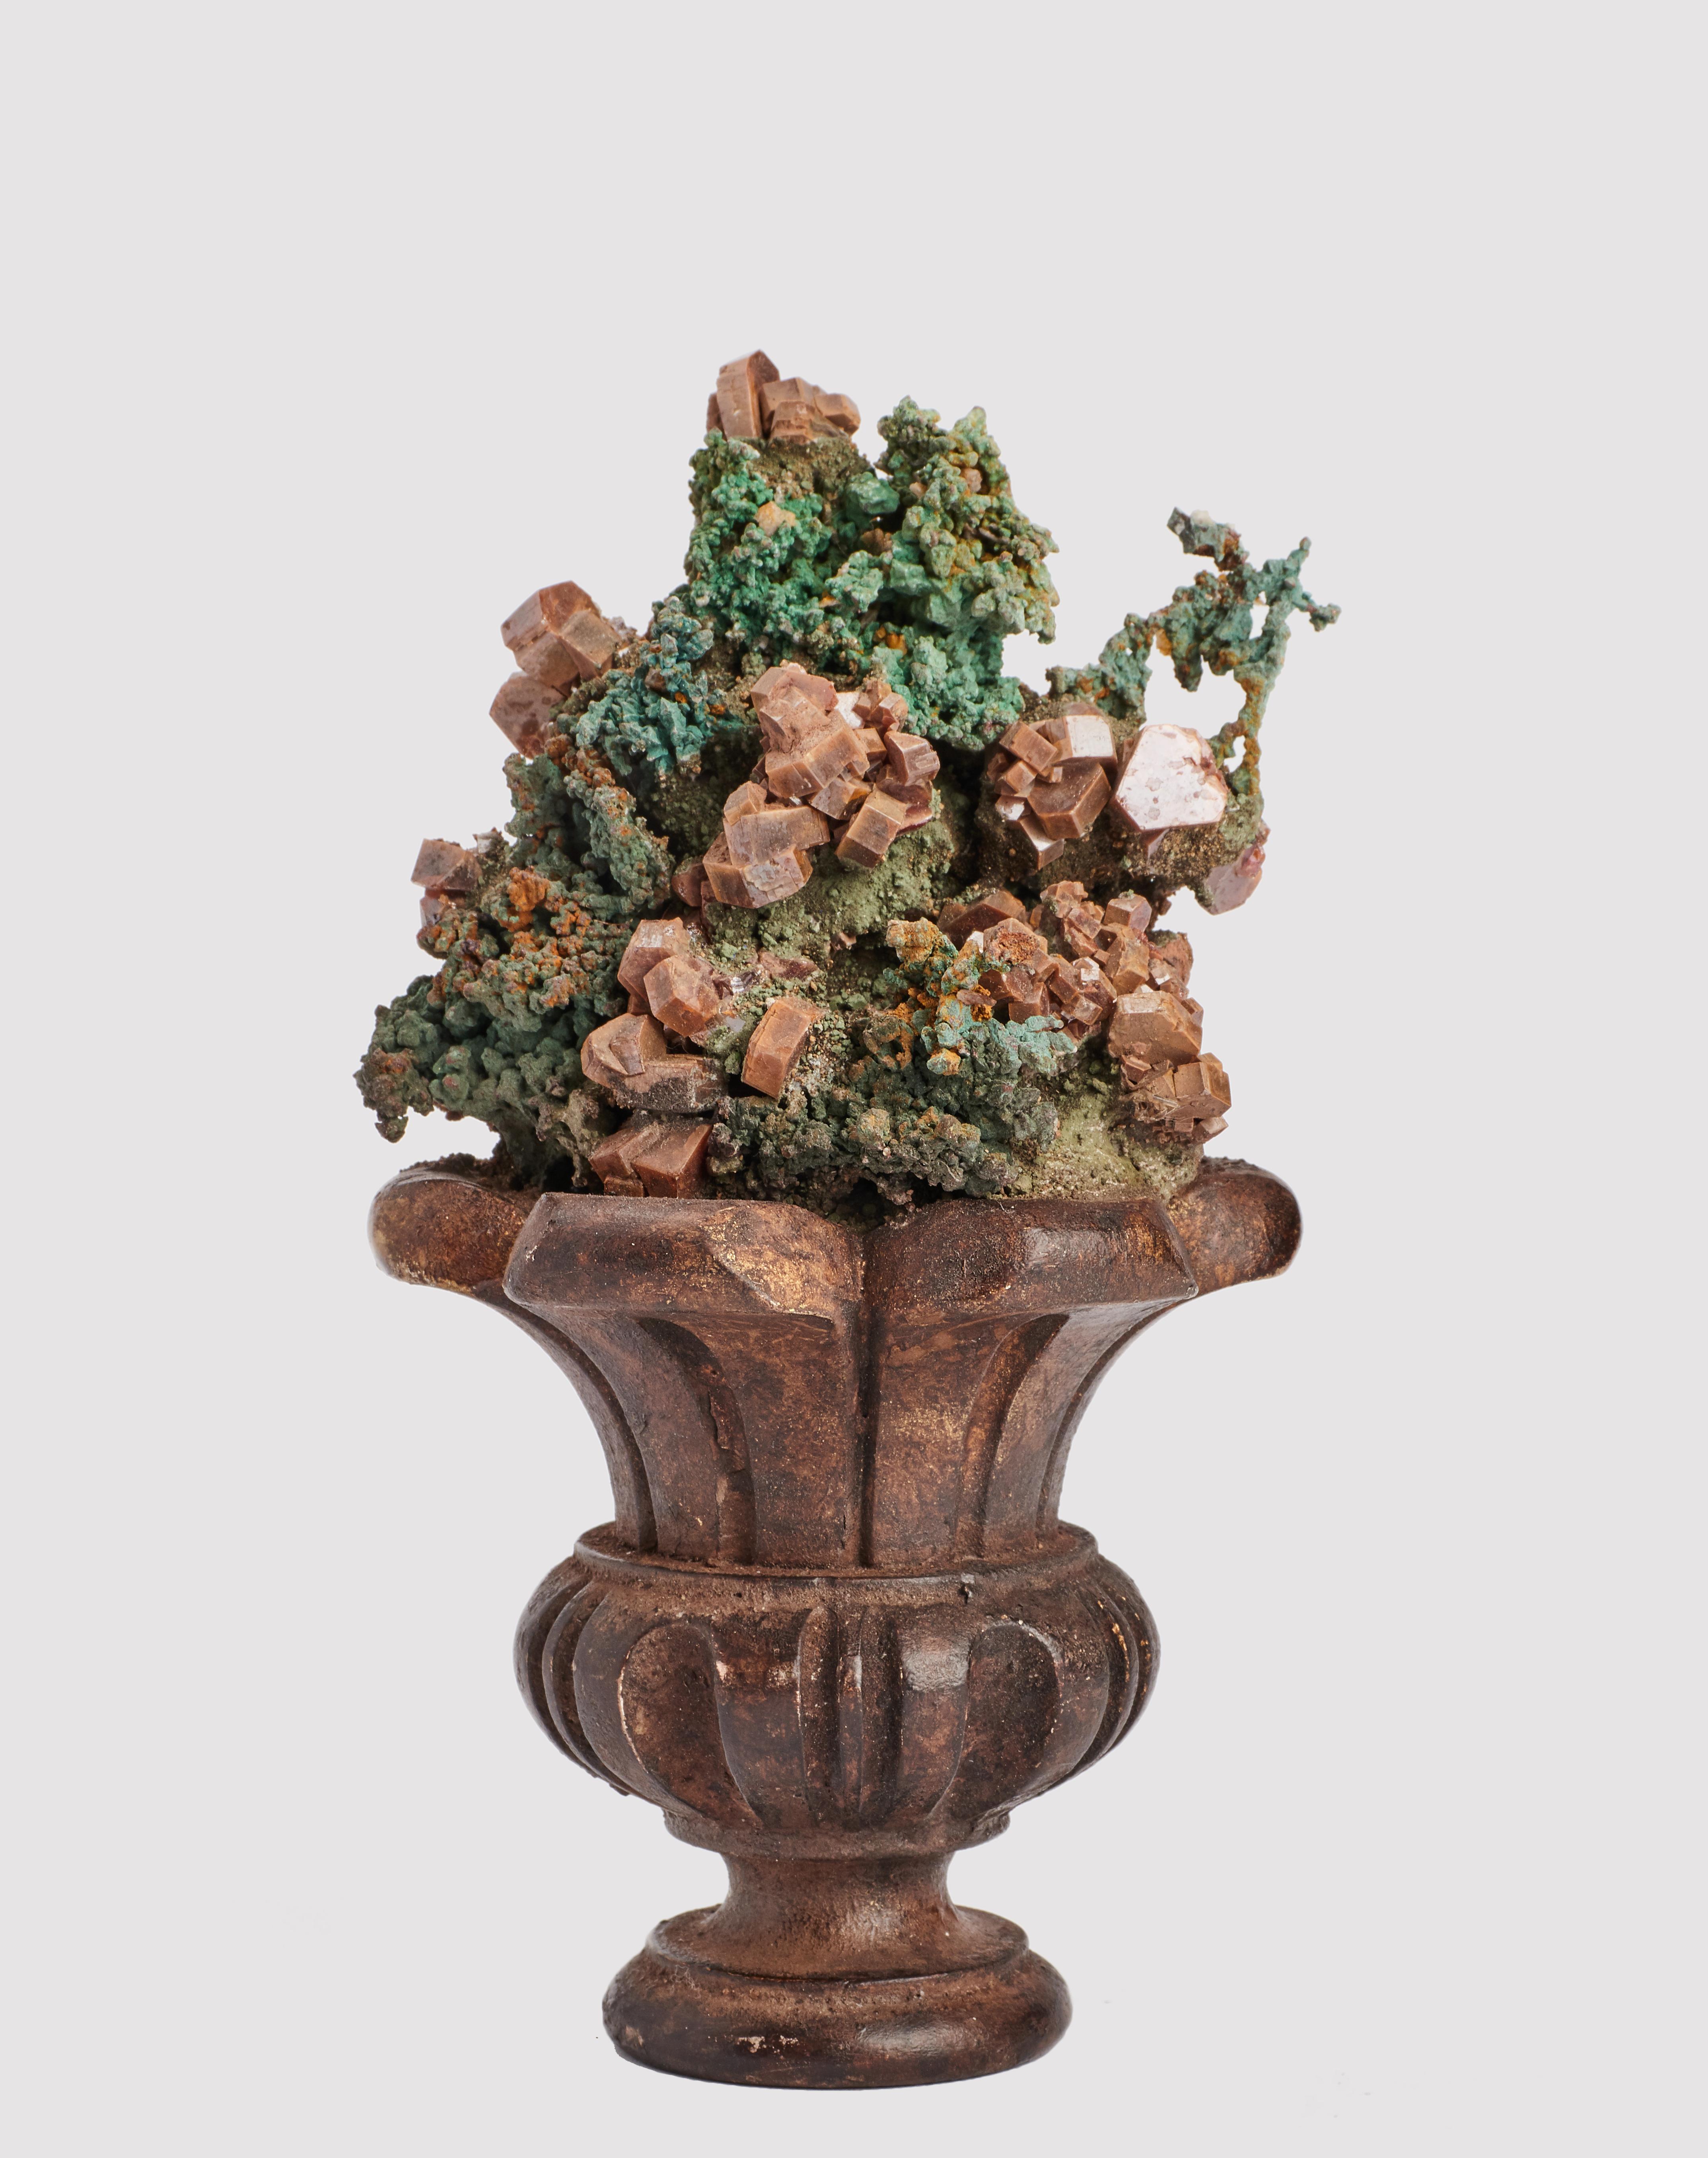 A Naturalia mineral specimen. A druze of Vanadinite and native copper crystals, mounted over carved lacquered wooden base, brown color. Italy, circa 1880.